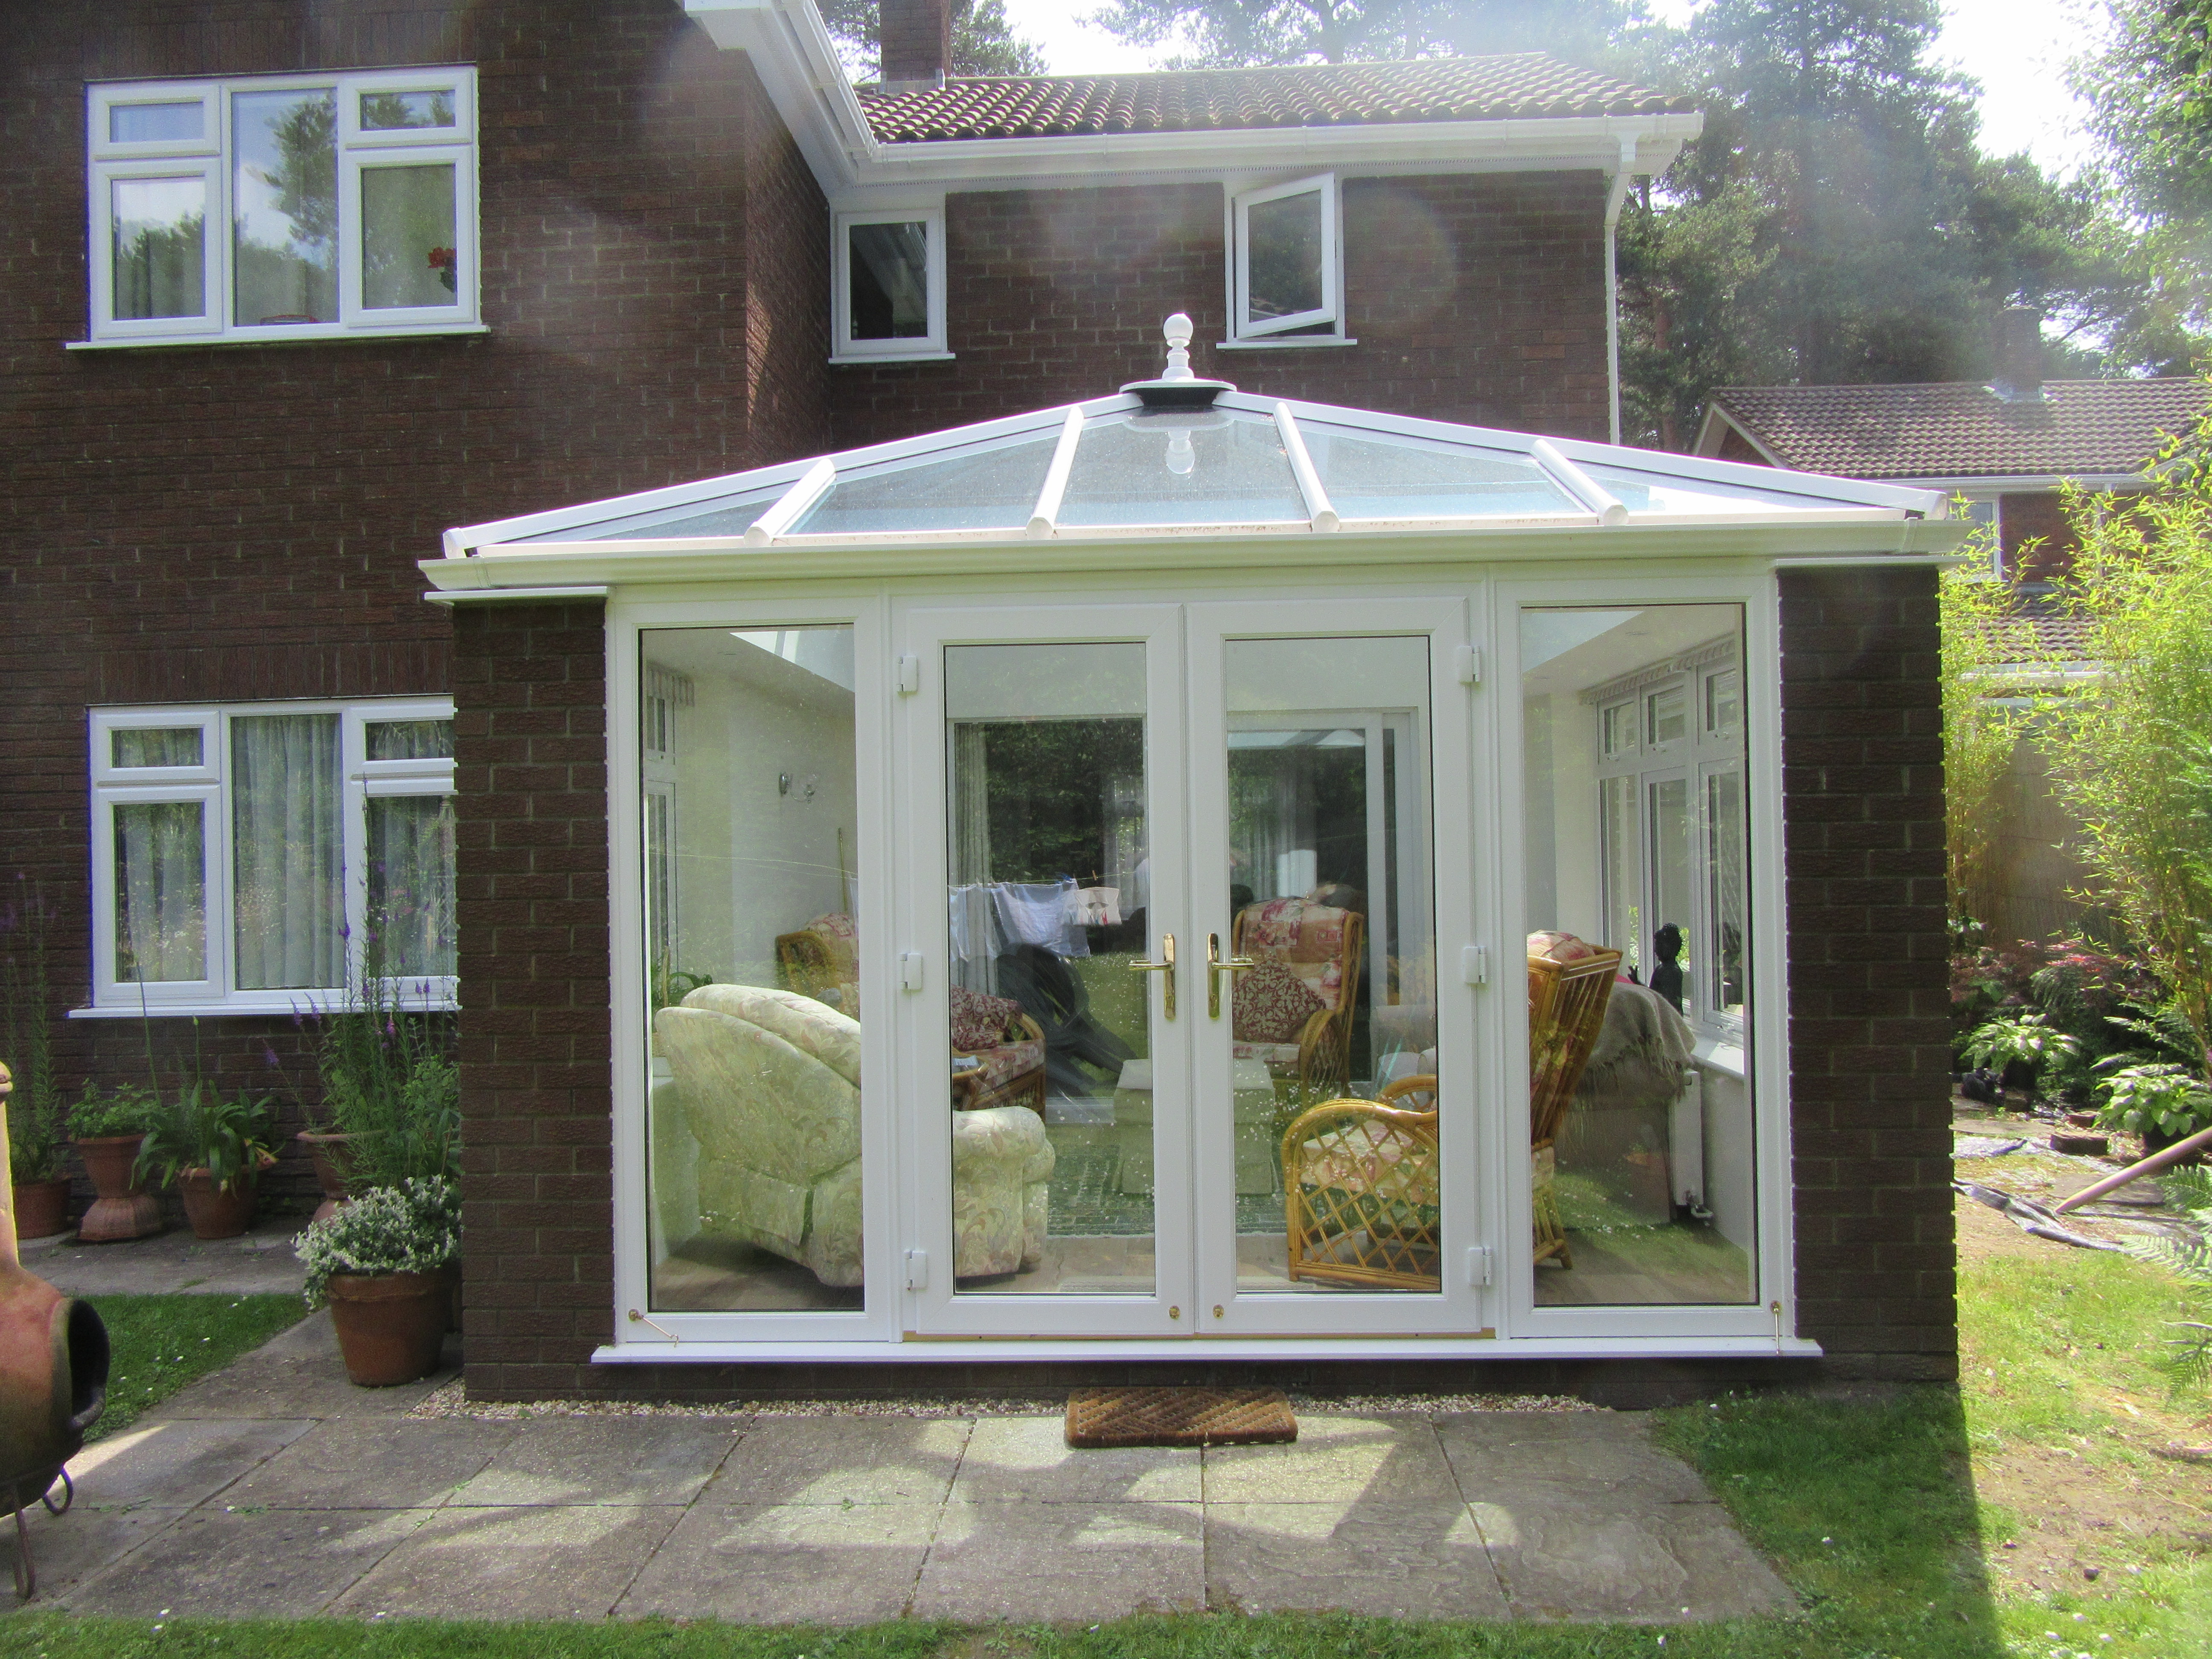 Comfortable and warm Livin room conservatory design.